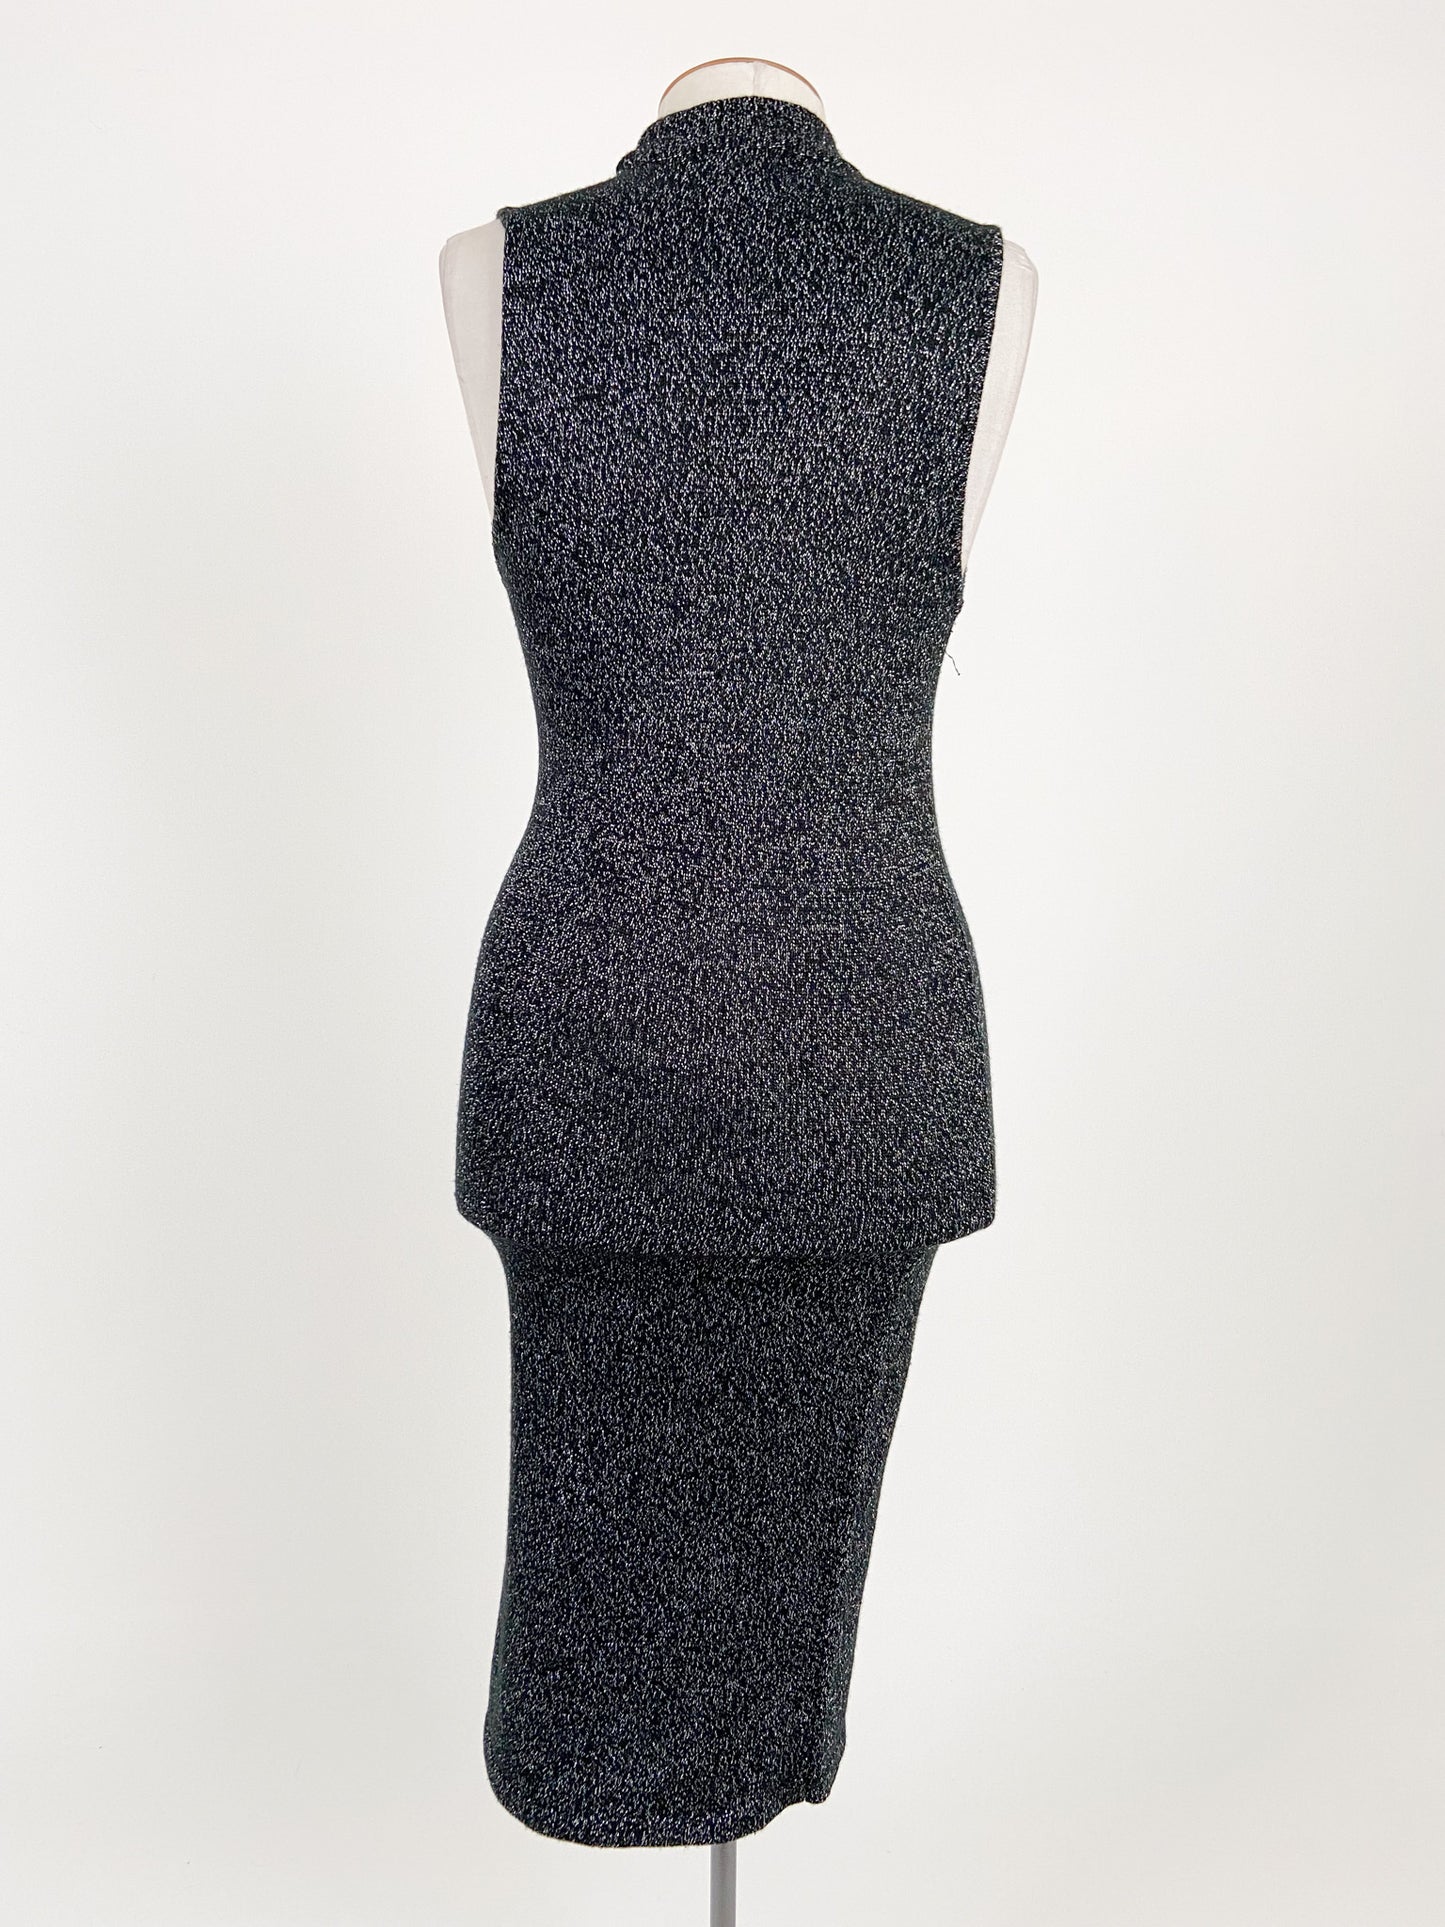 Forever 21 | Black Casual Dress | Size M